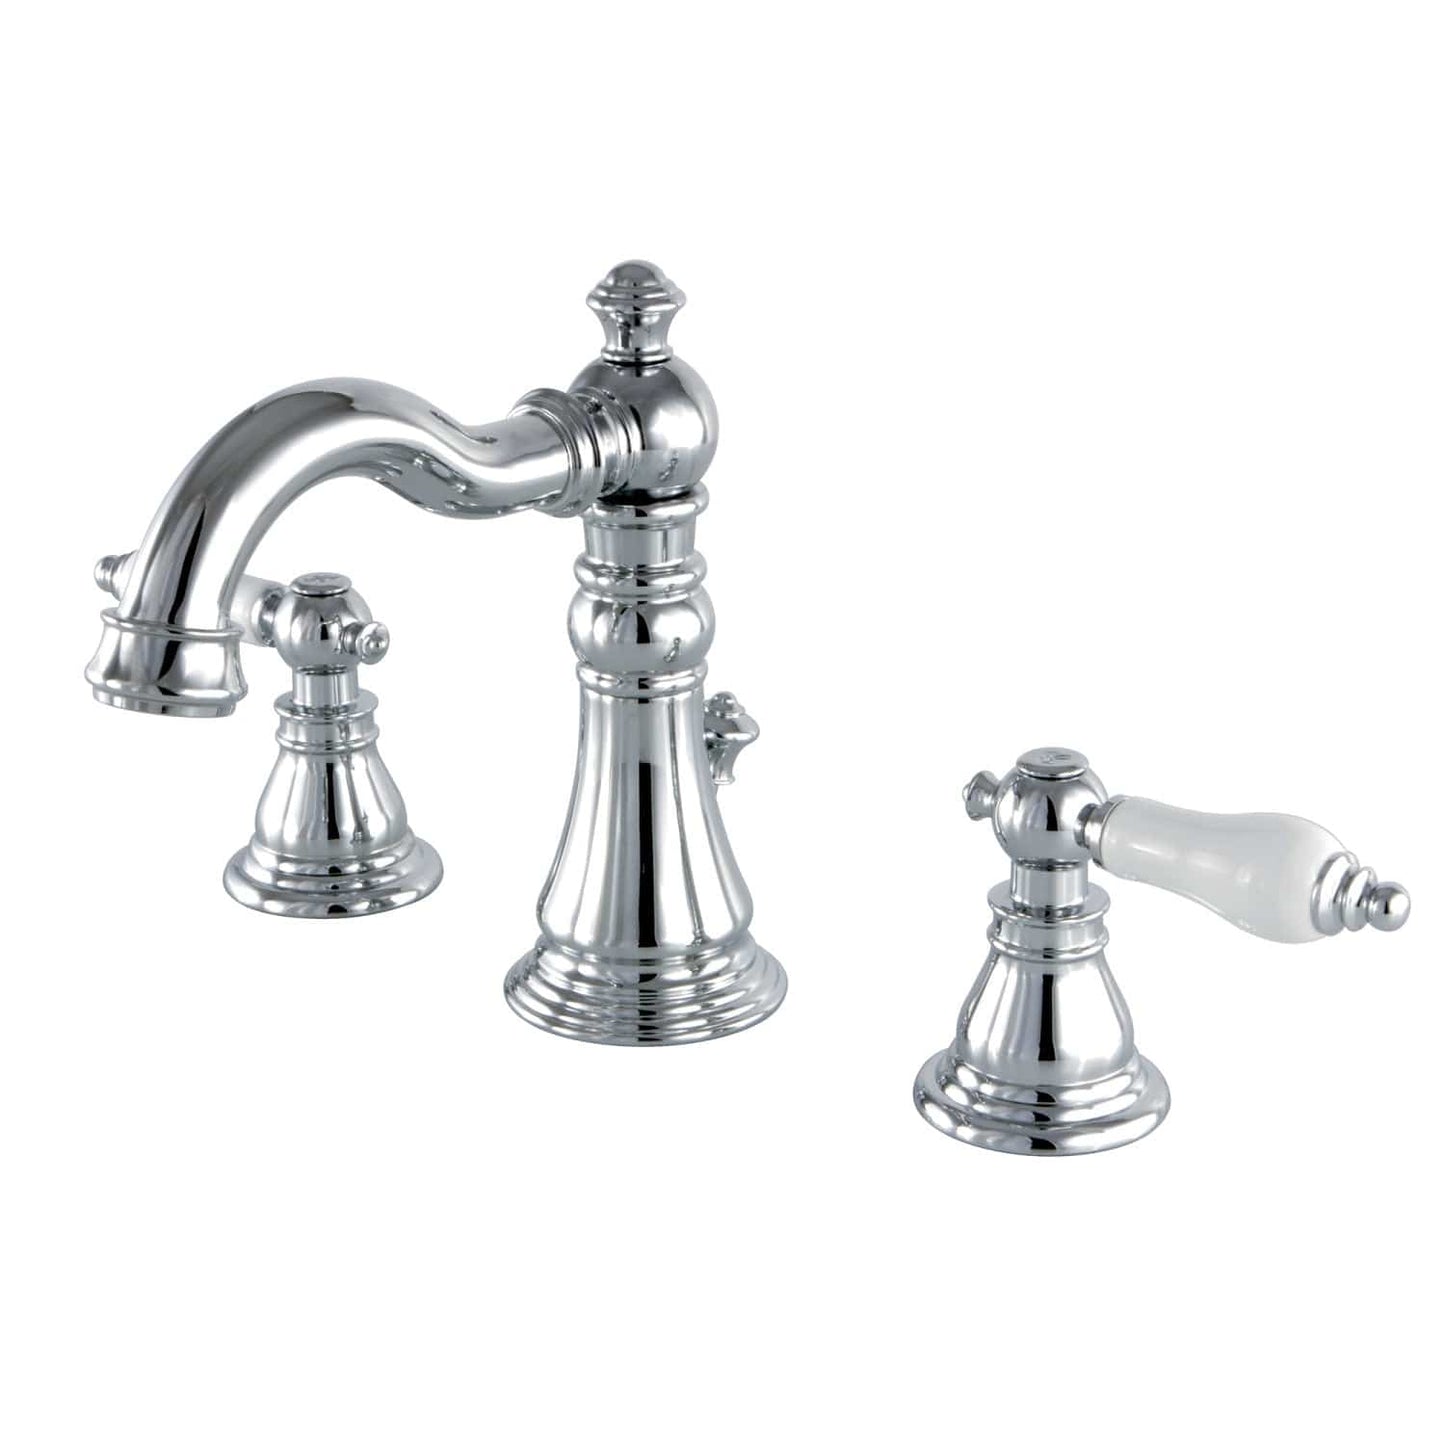 KINGSTON Brass Fauceture American Patriot Widespread Bathroom Faucet - Polished Chrome